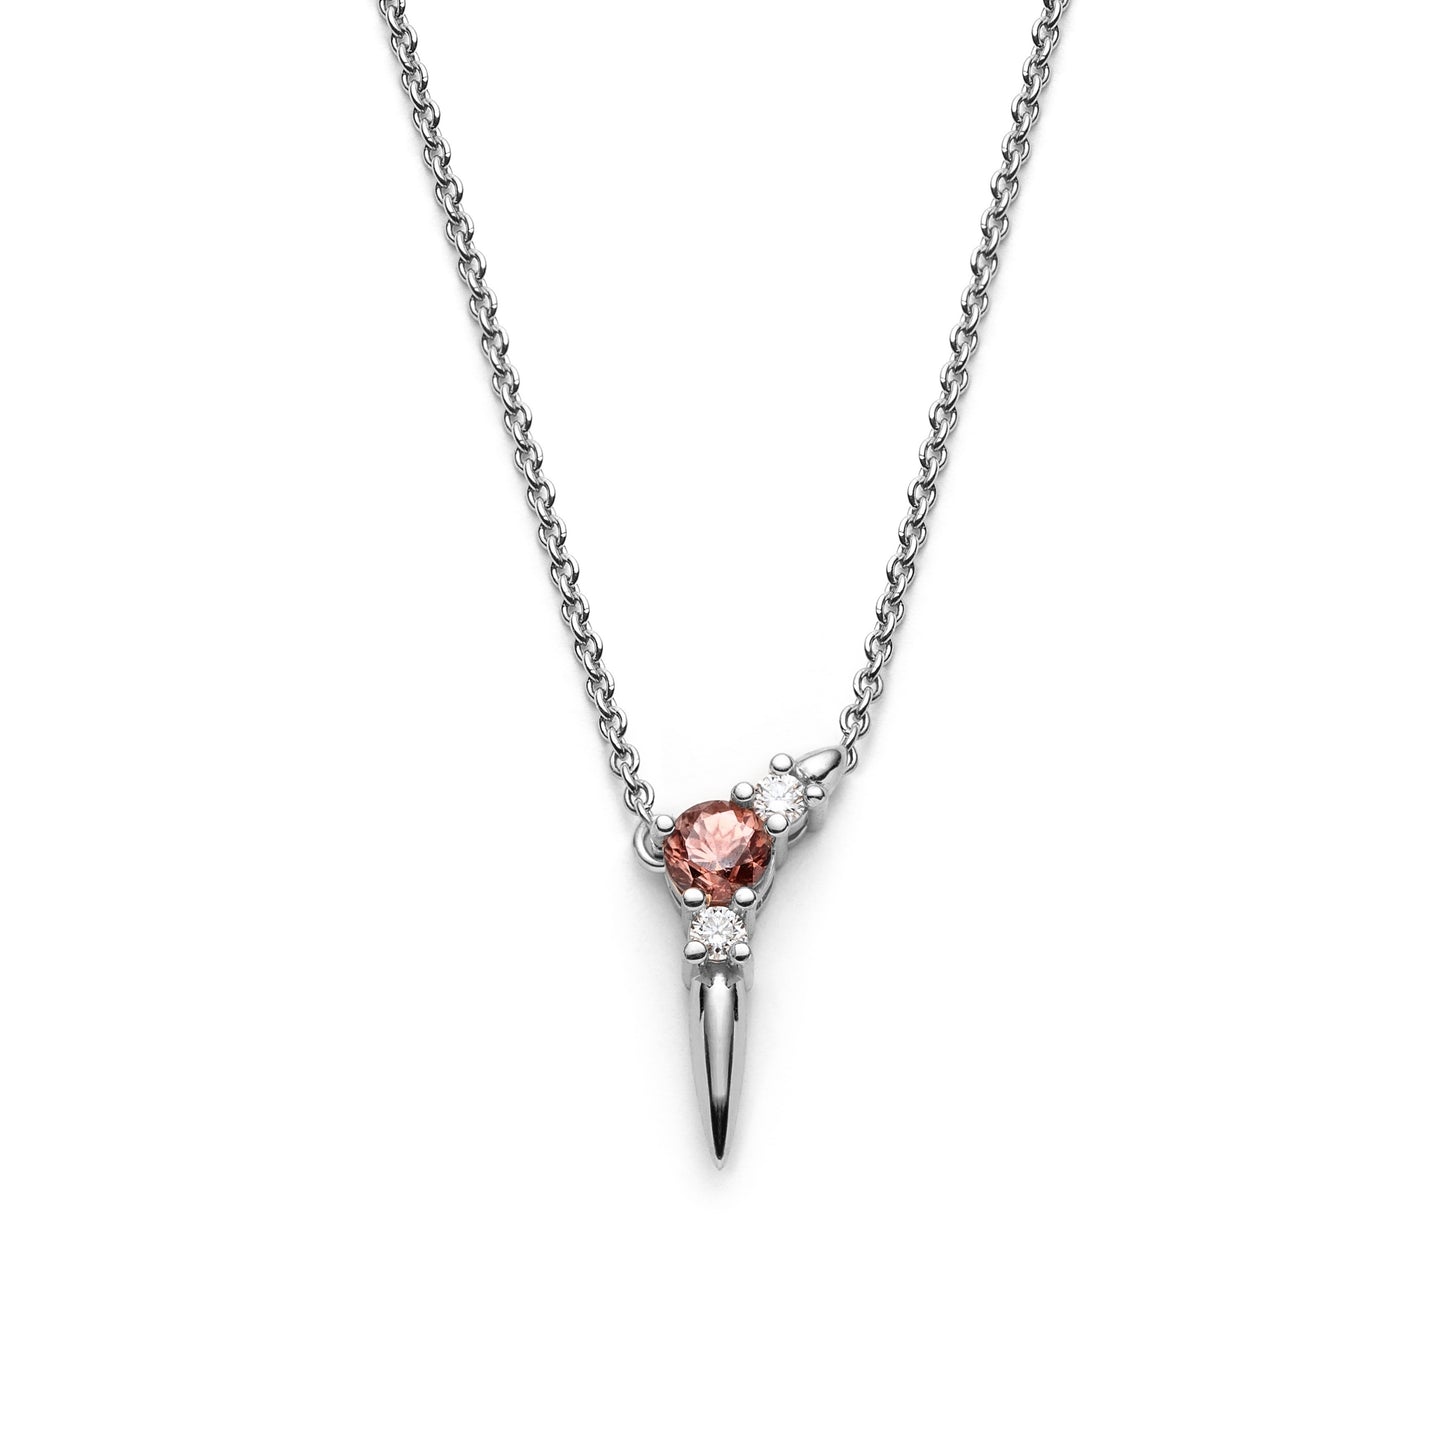 Spiked asymmetric natural zircon and diamond necklace